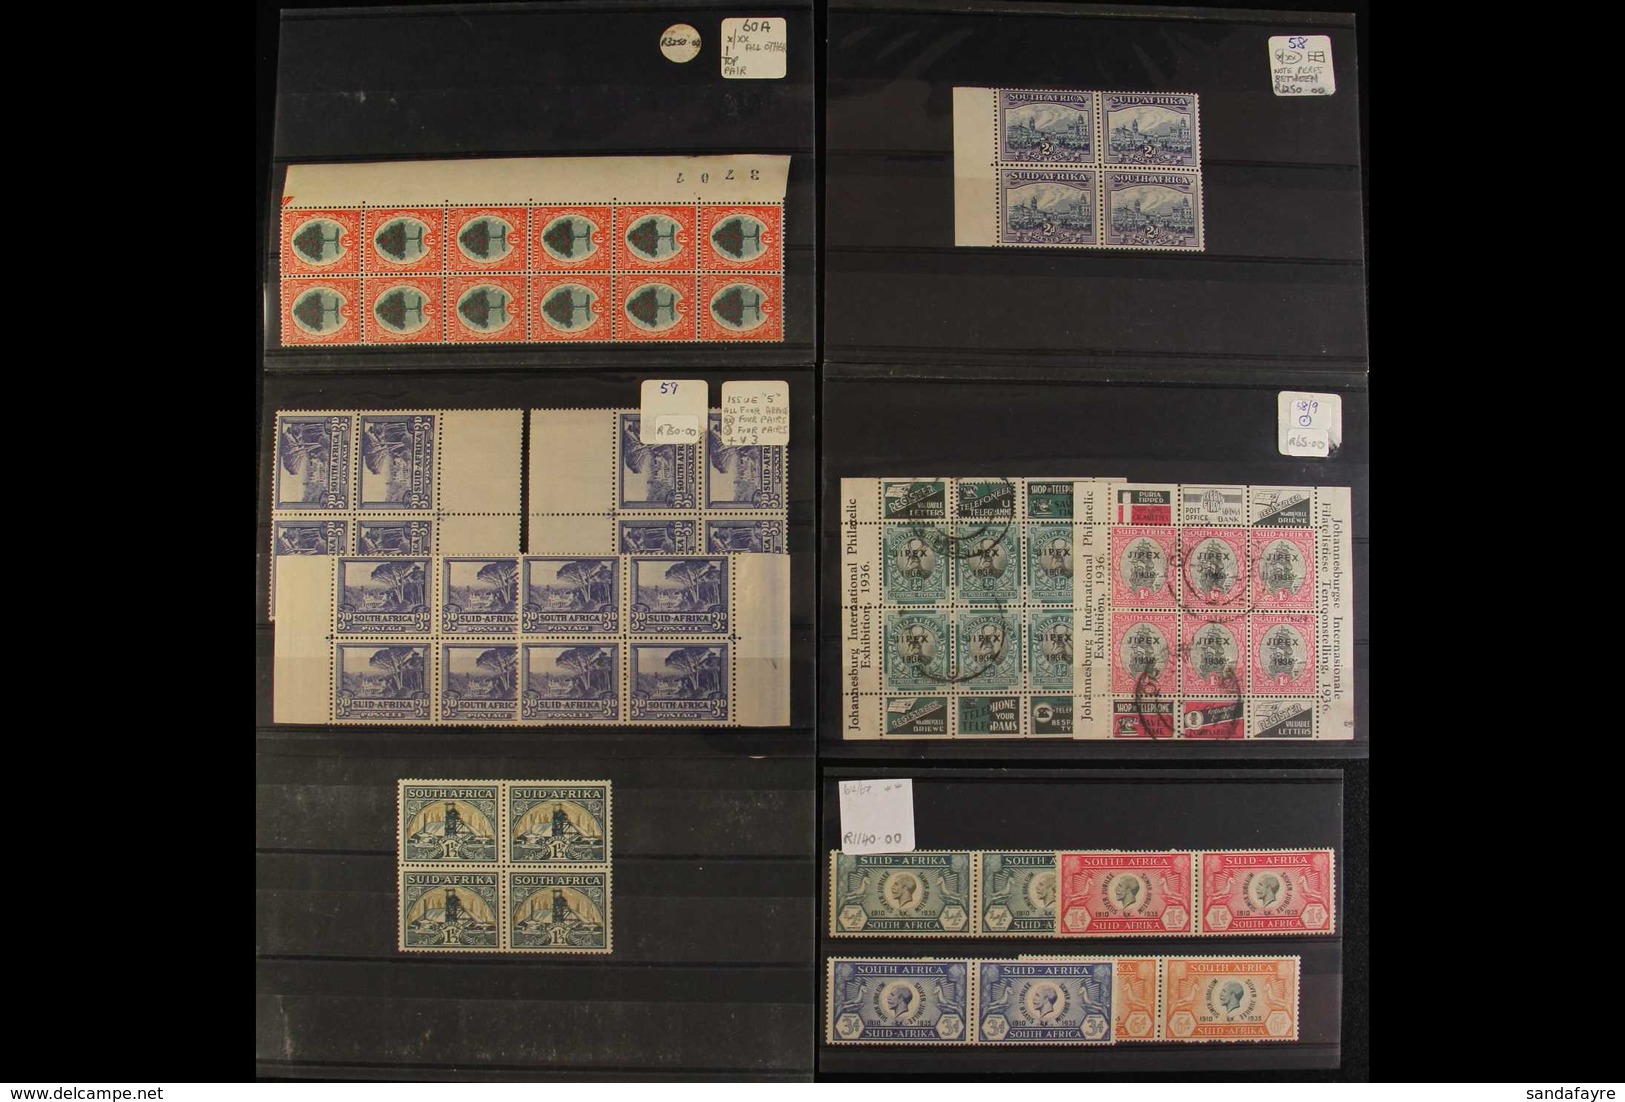 1925-49 MINT & USED STOCK - CAT £10,900+  Large Shoebox Sized Box, Full Of Pairs Or Blocks On Stock Cards, Arranged By I - Unclassified